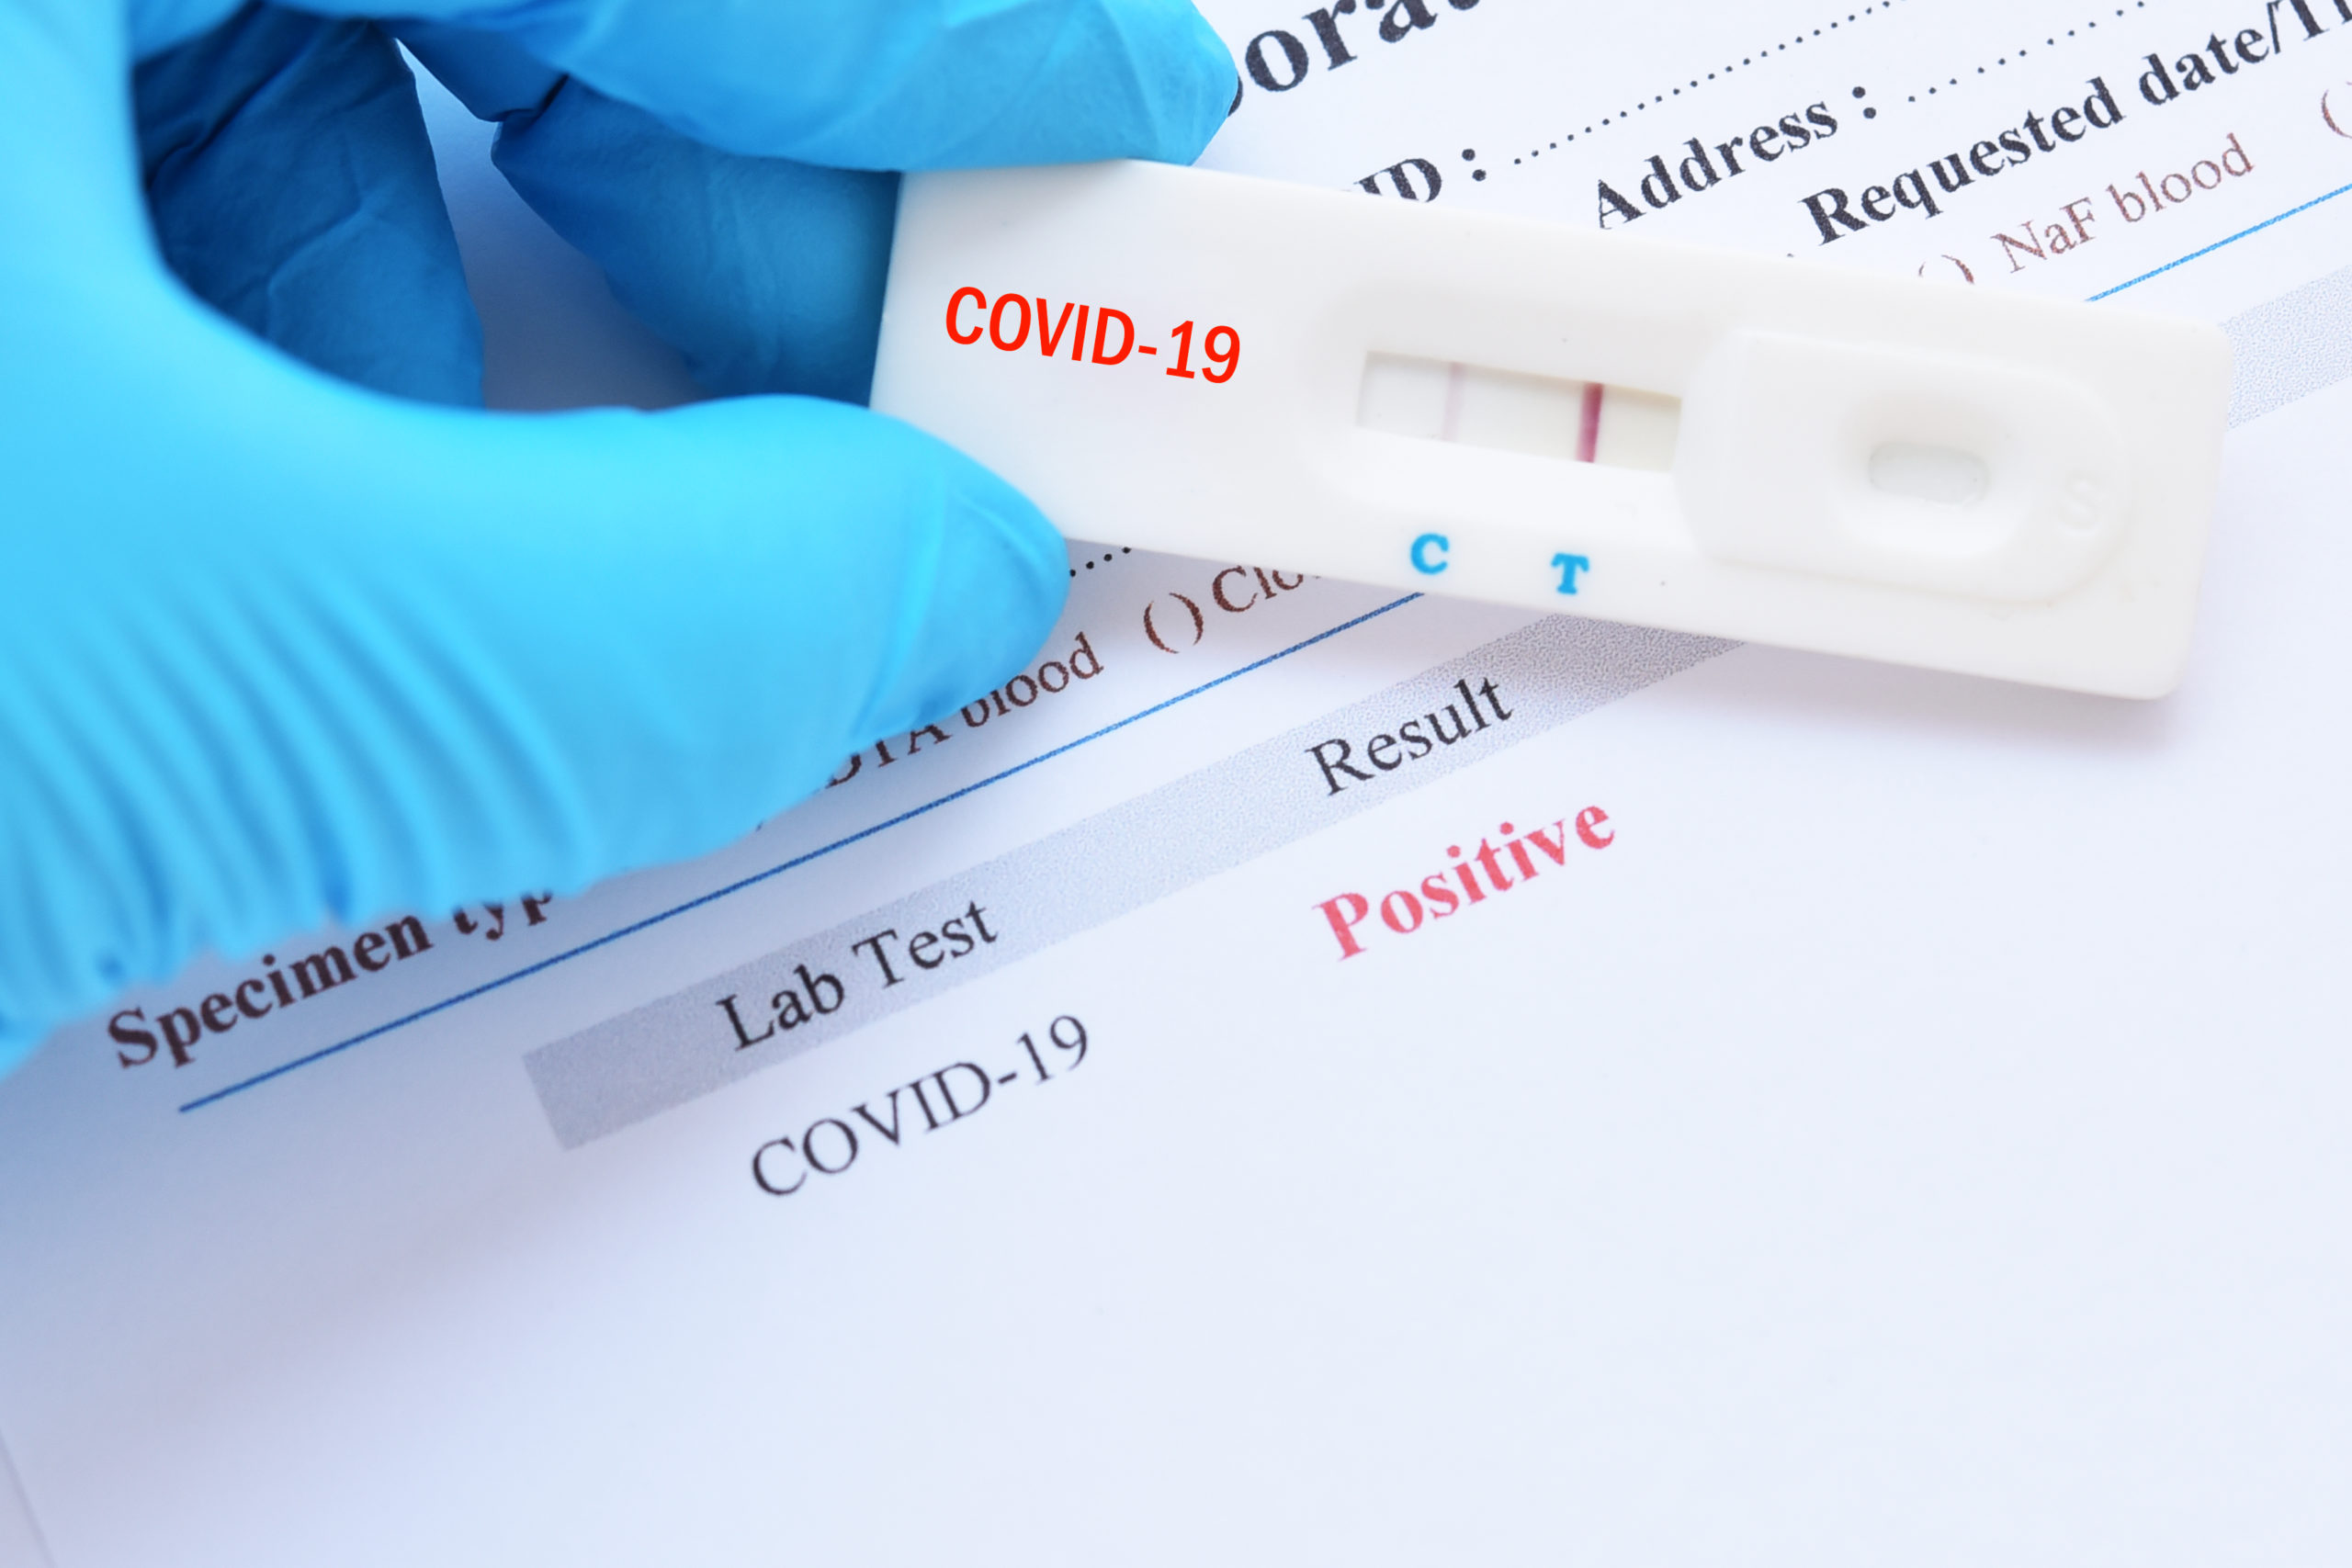 Covid Test / Texas coronavirus tests: Capacity remains limited, but ... : Types of testing • how can i get tested?